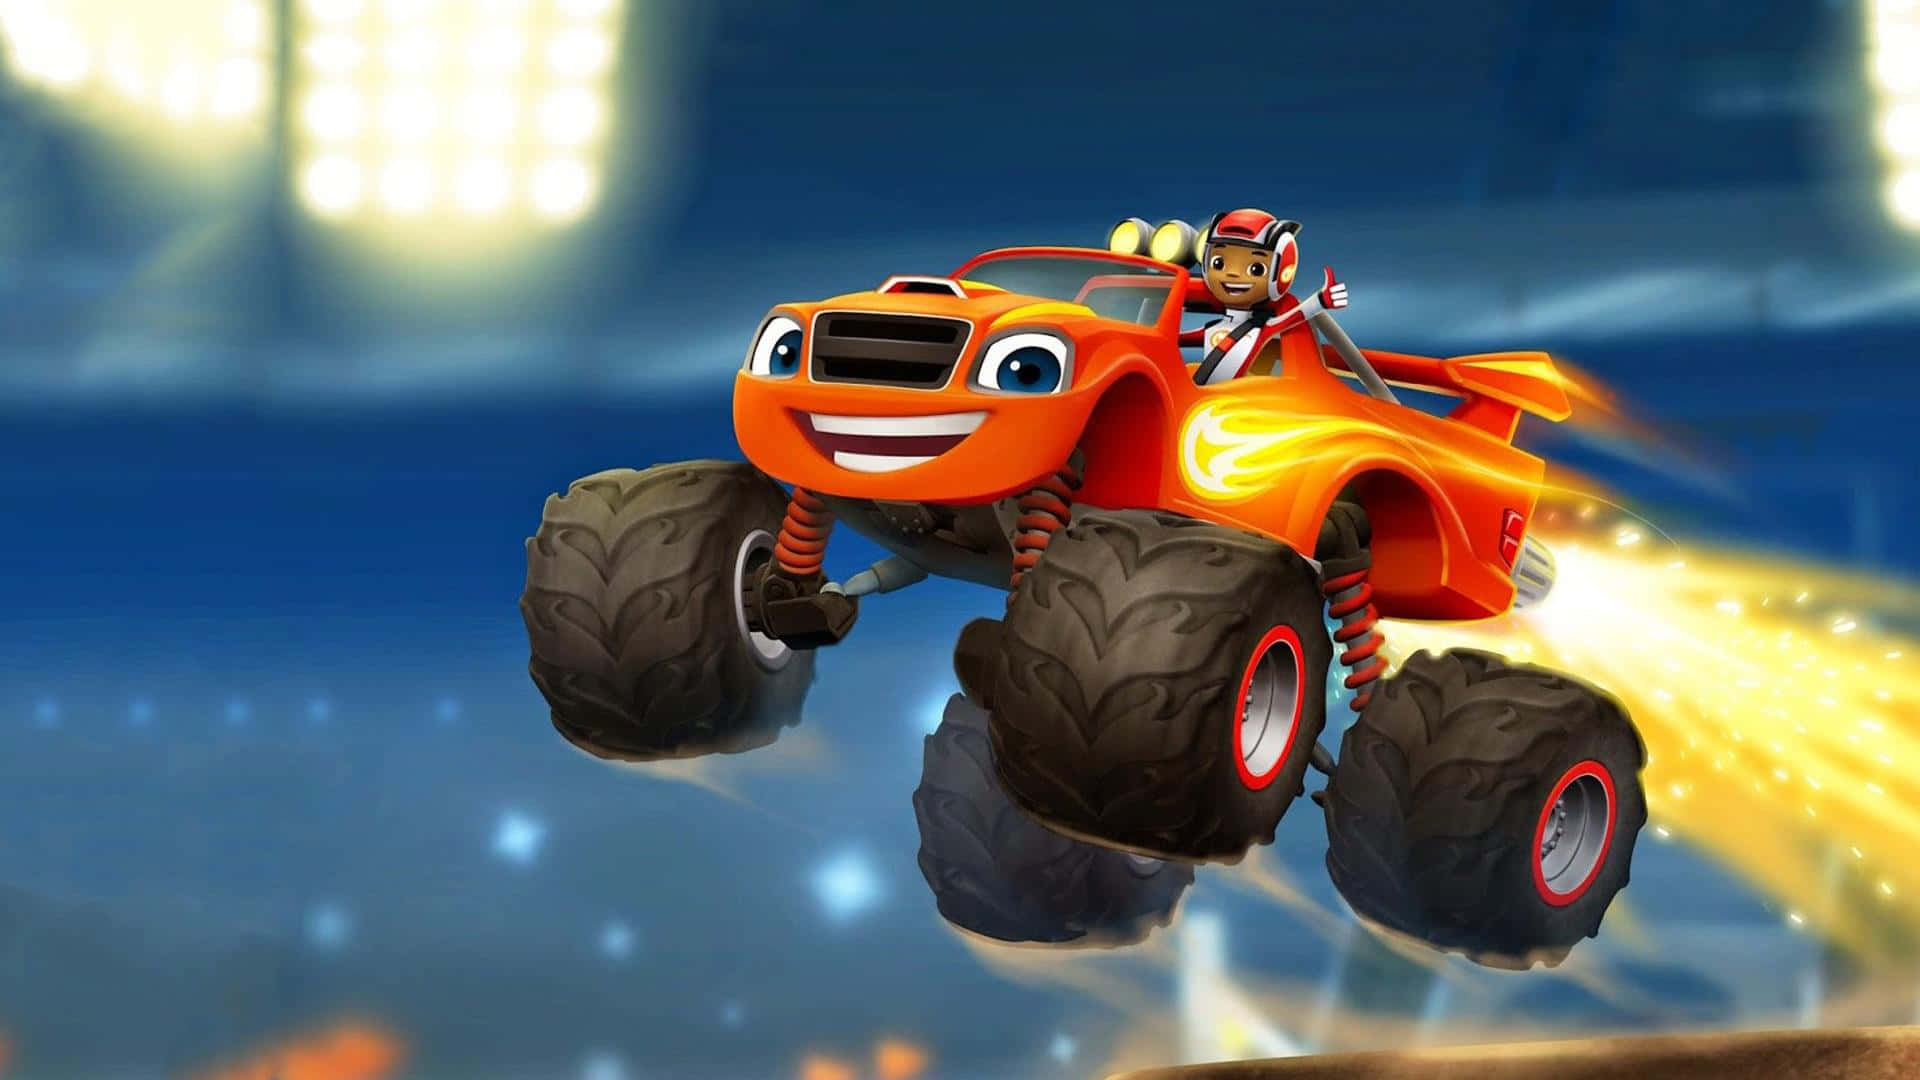 A Cartoon Image Of A Monster Truck Flying Through The Air